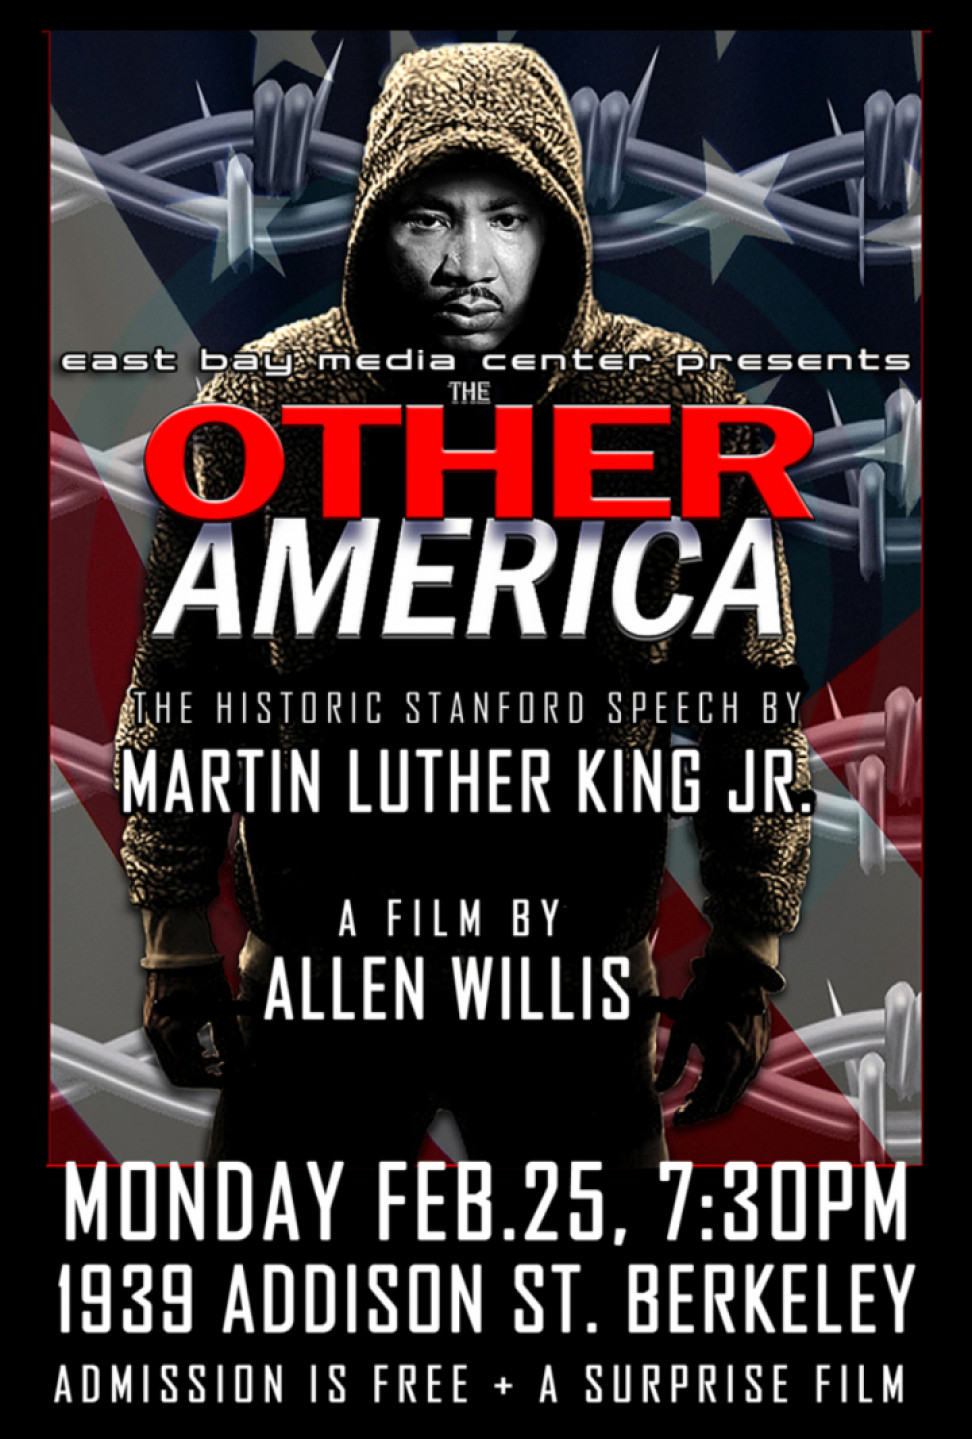 The Other America Screening